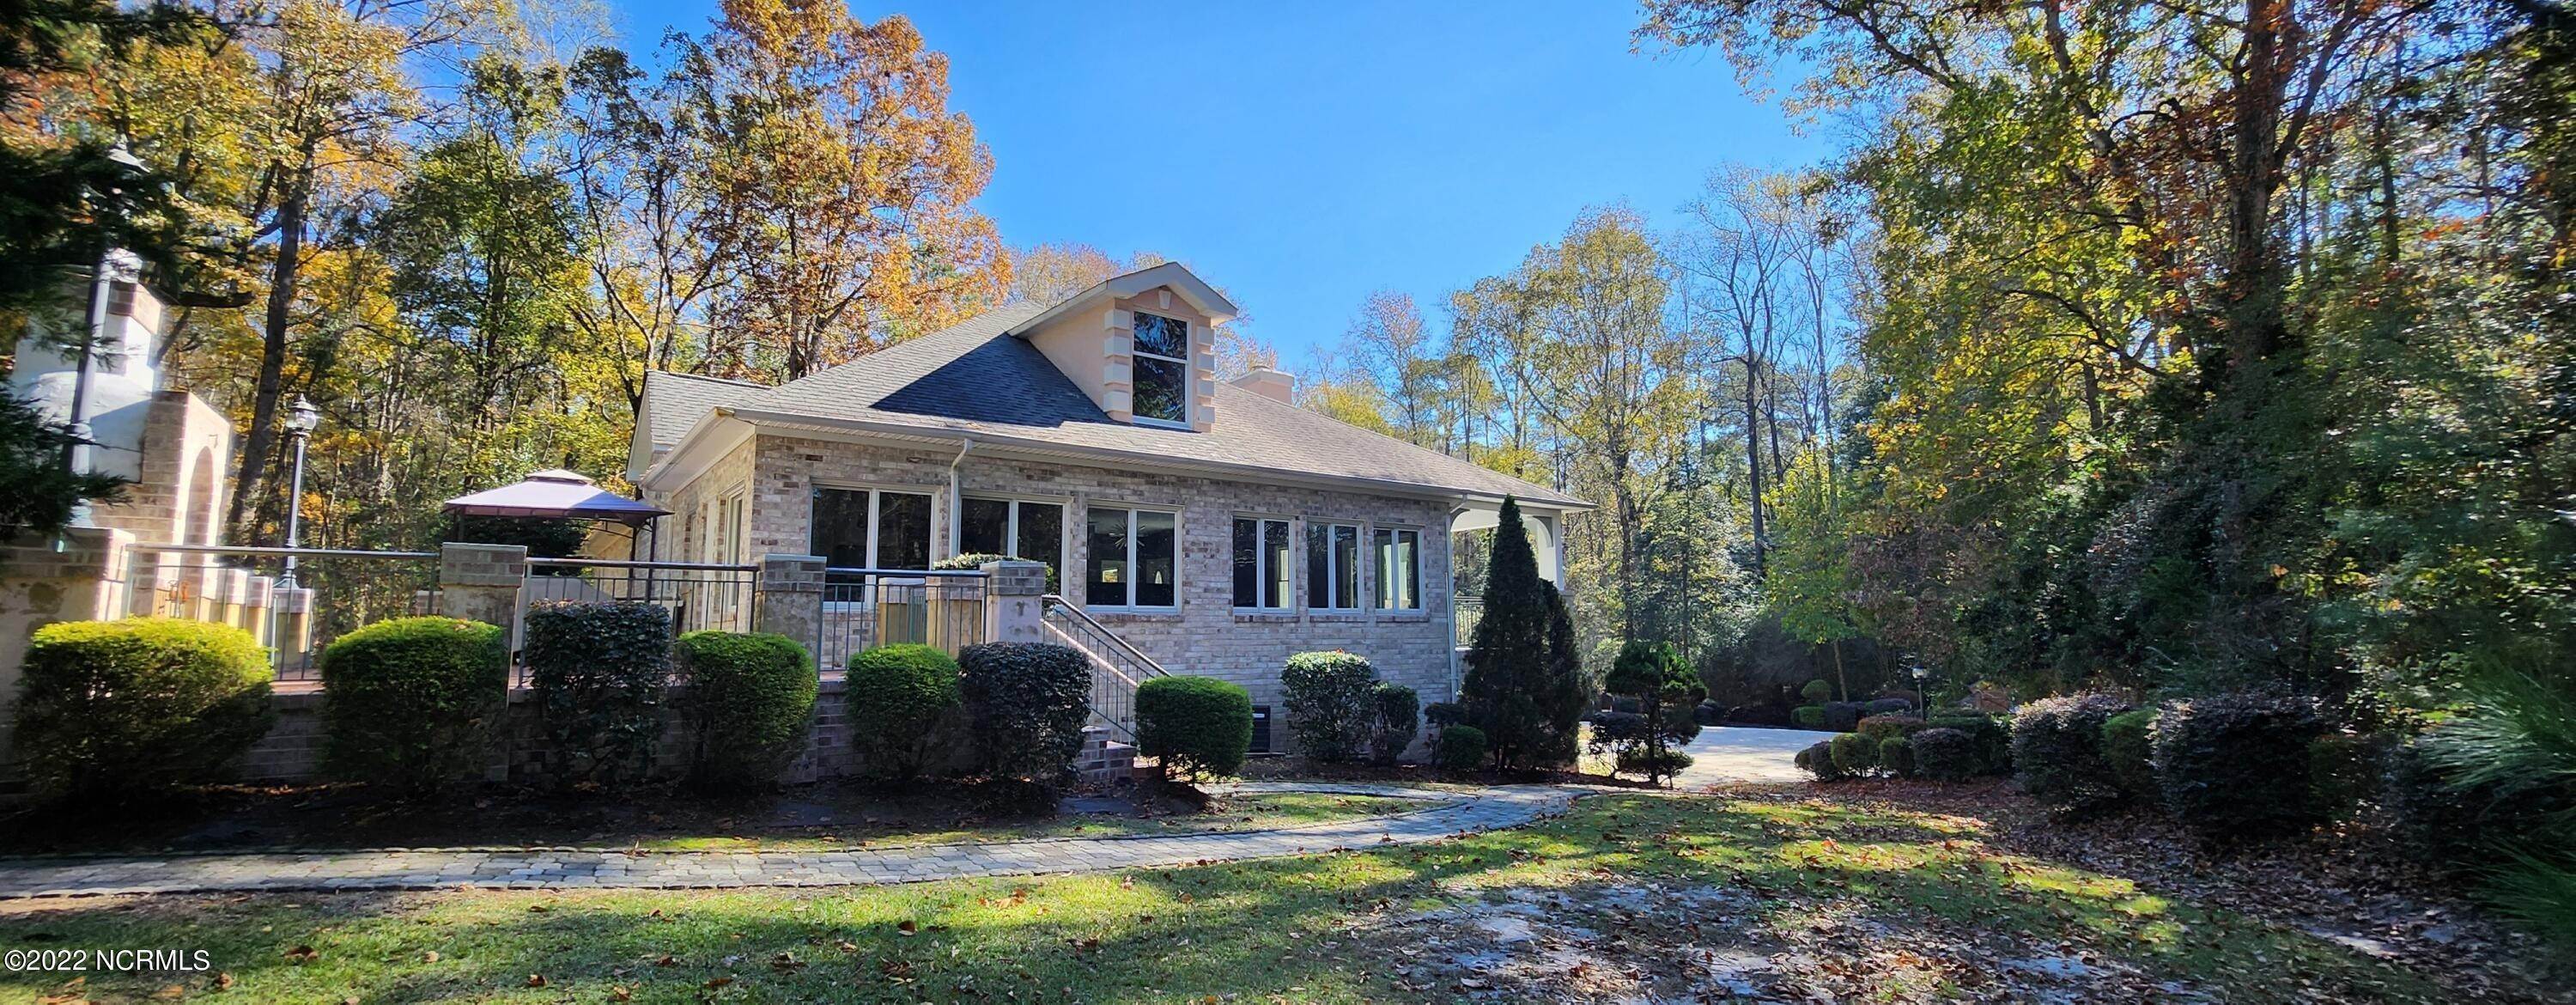 7. Single Family for Sale at Greenville, NC 27858